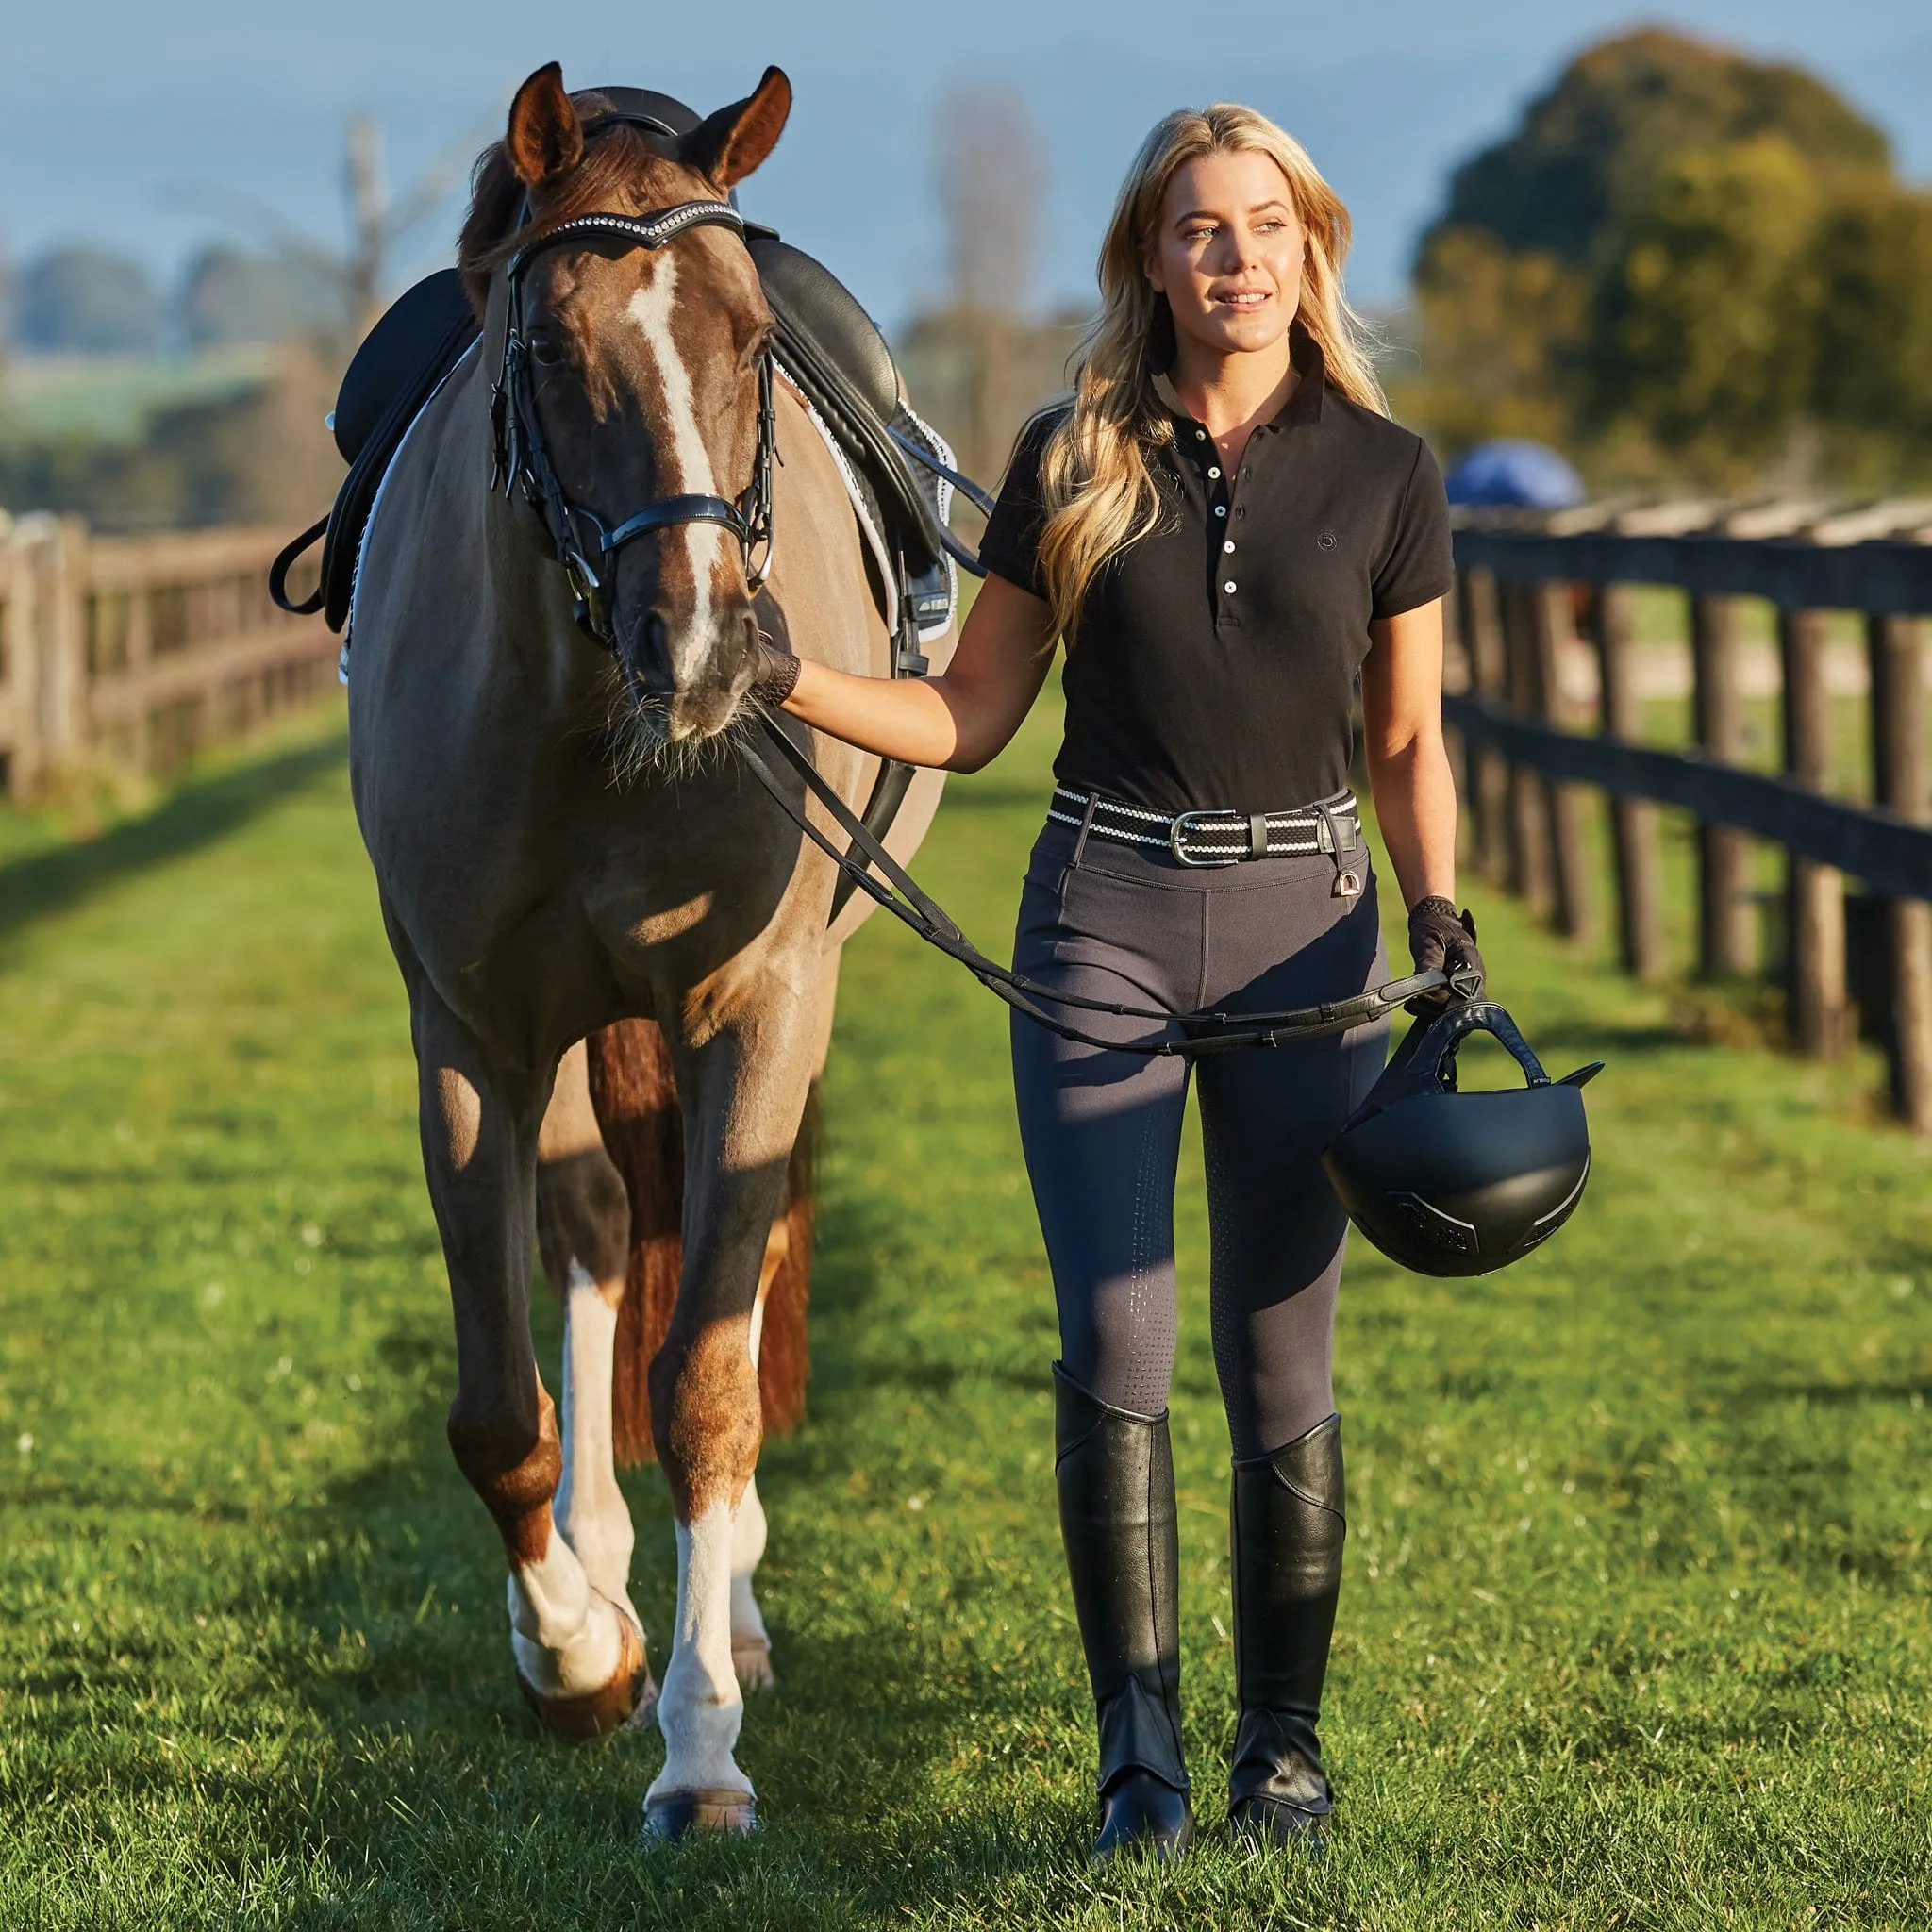 Horse show----Welsh Pony Show----English Attire. #horseridinghelmets |  Equestrian outfits, Show horses, Riding outfit